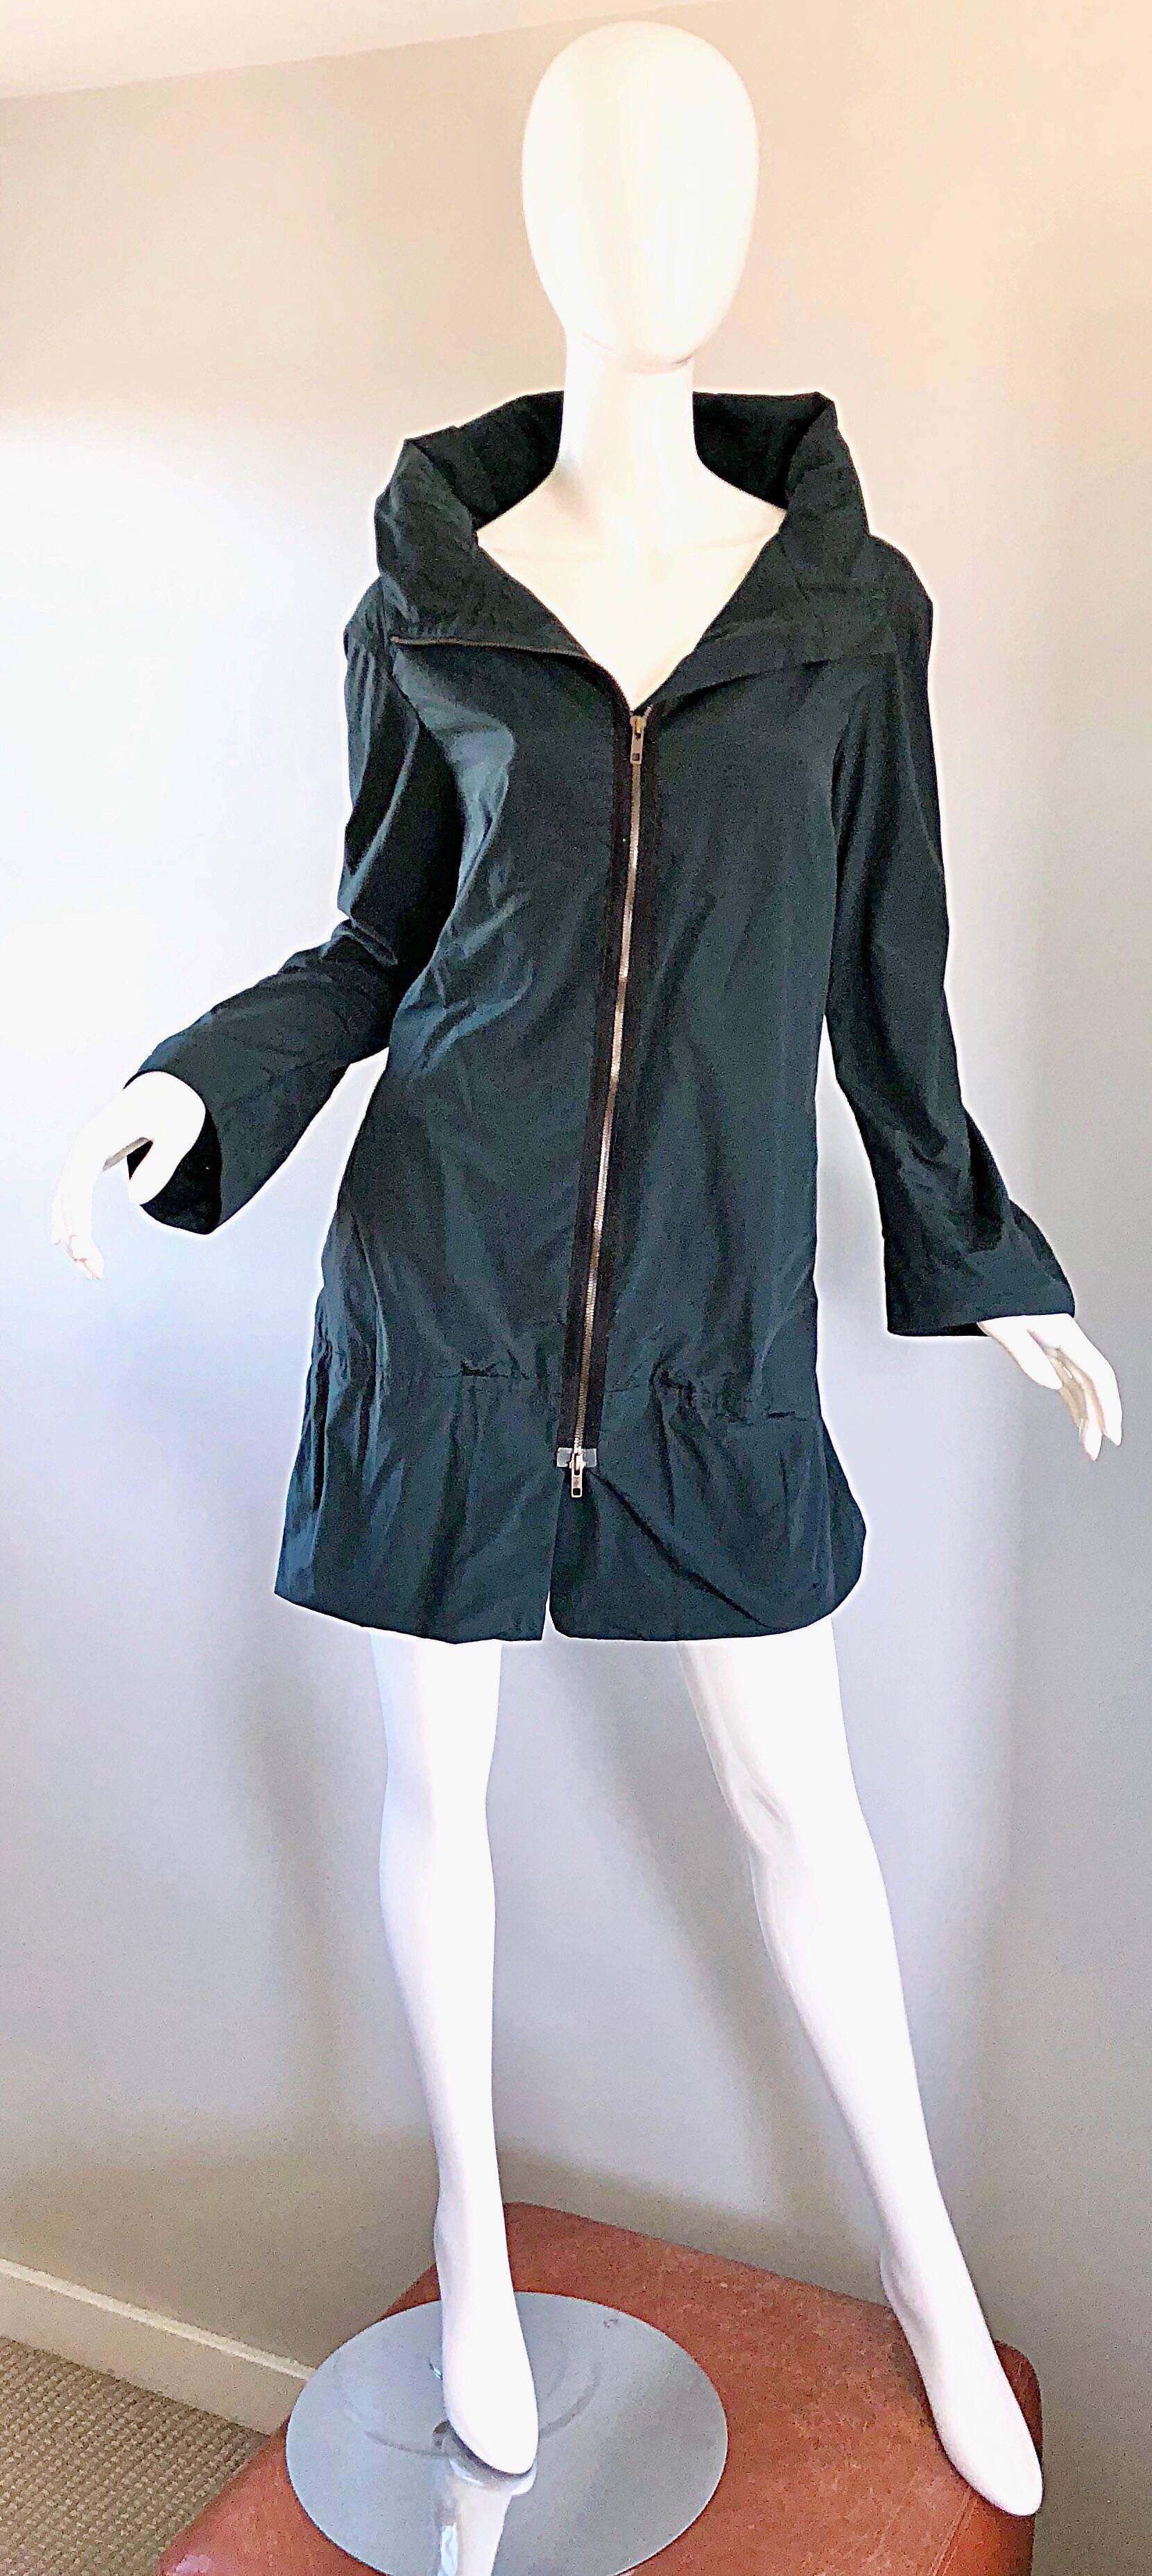 New chic early 2000s MARNI dark forest green parka rain jacket! Features a large oversized shawl collar that can be zipped all the way to the neck, or left open. Pockets at each side of the waist. 
A timeless must have for any fashionista that wants